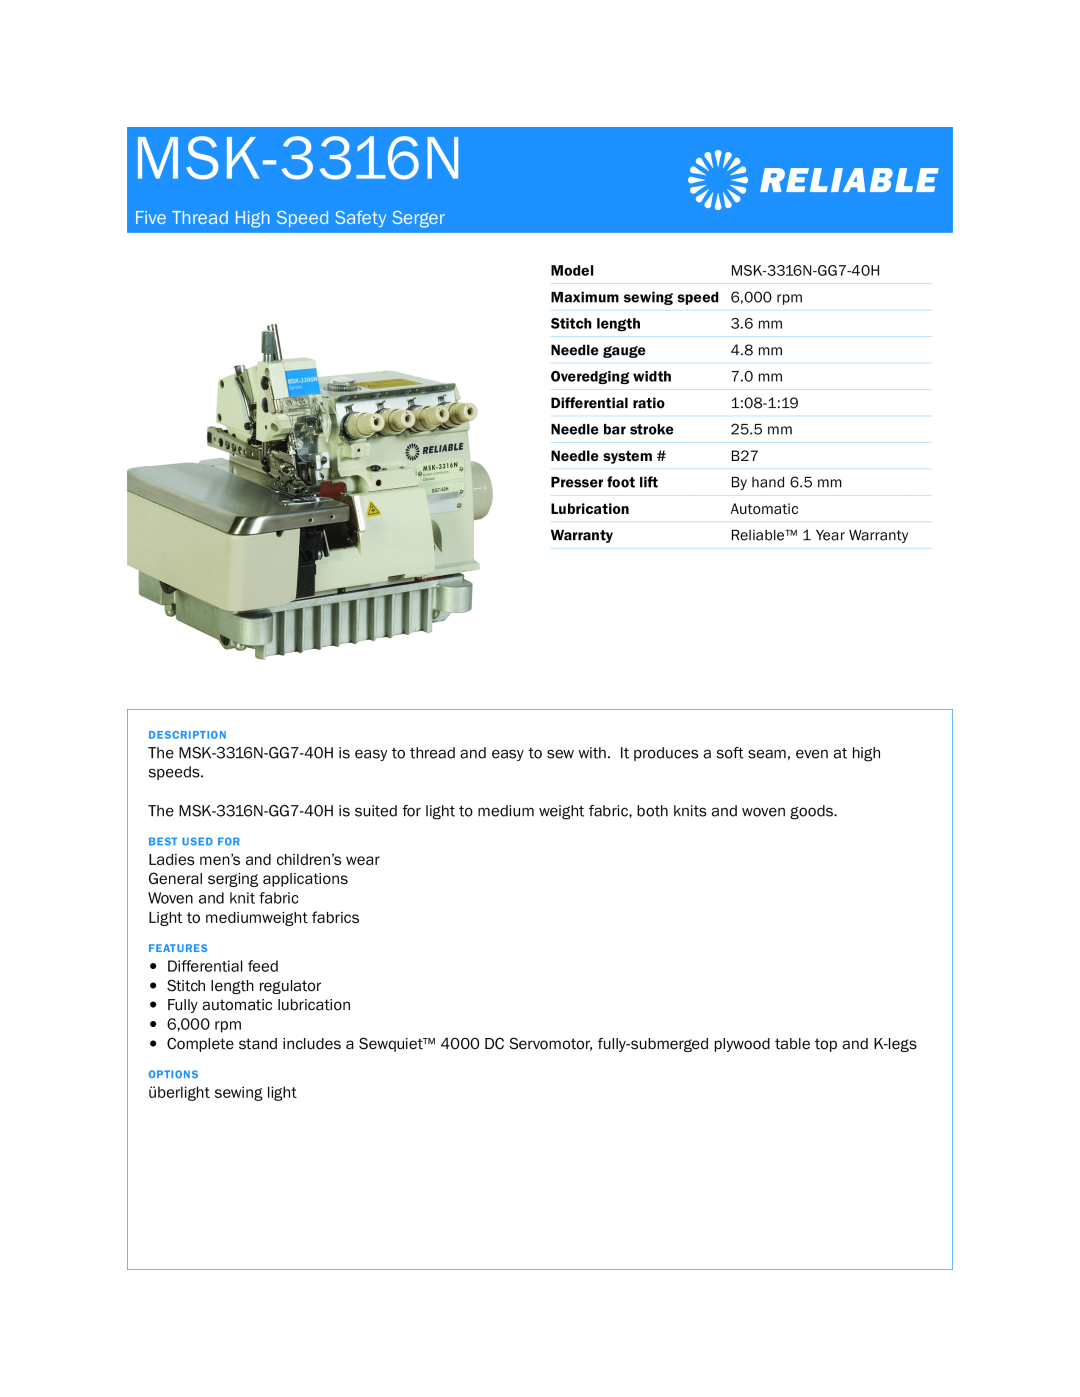 Reliable MSK-3316N warranty Five Thread High Speed Safety Serger 